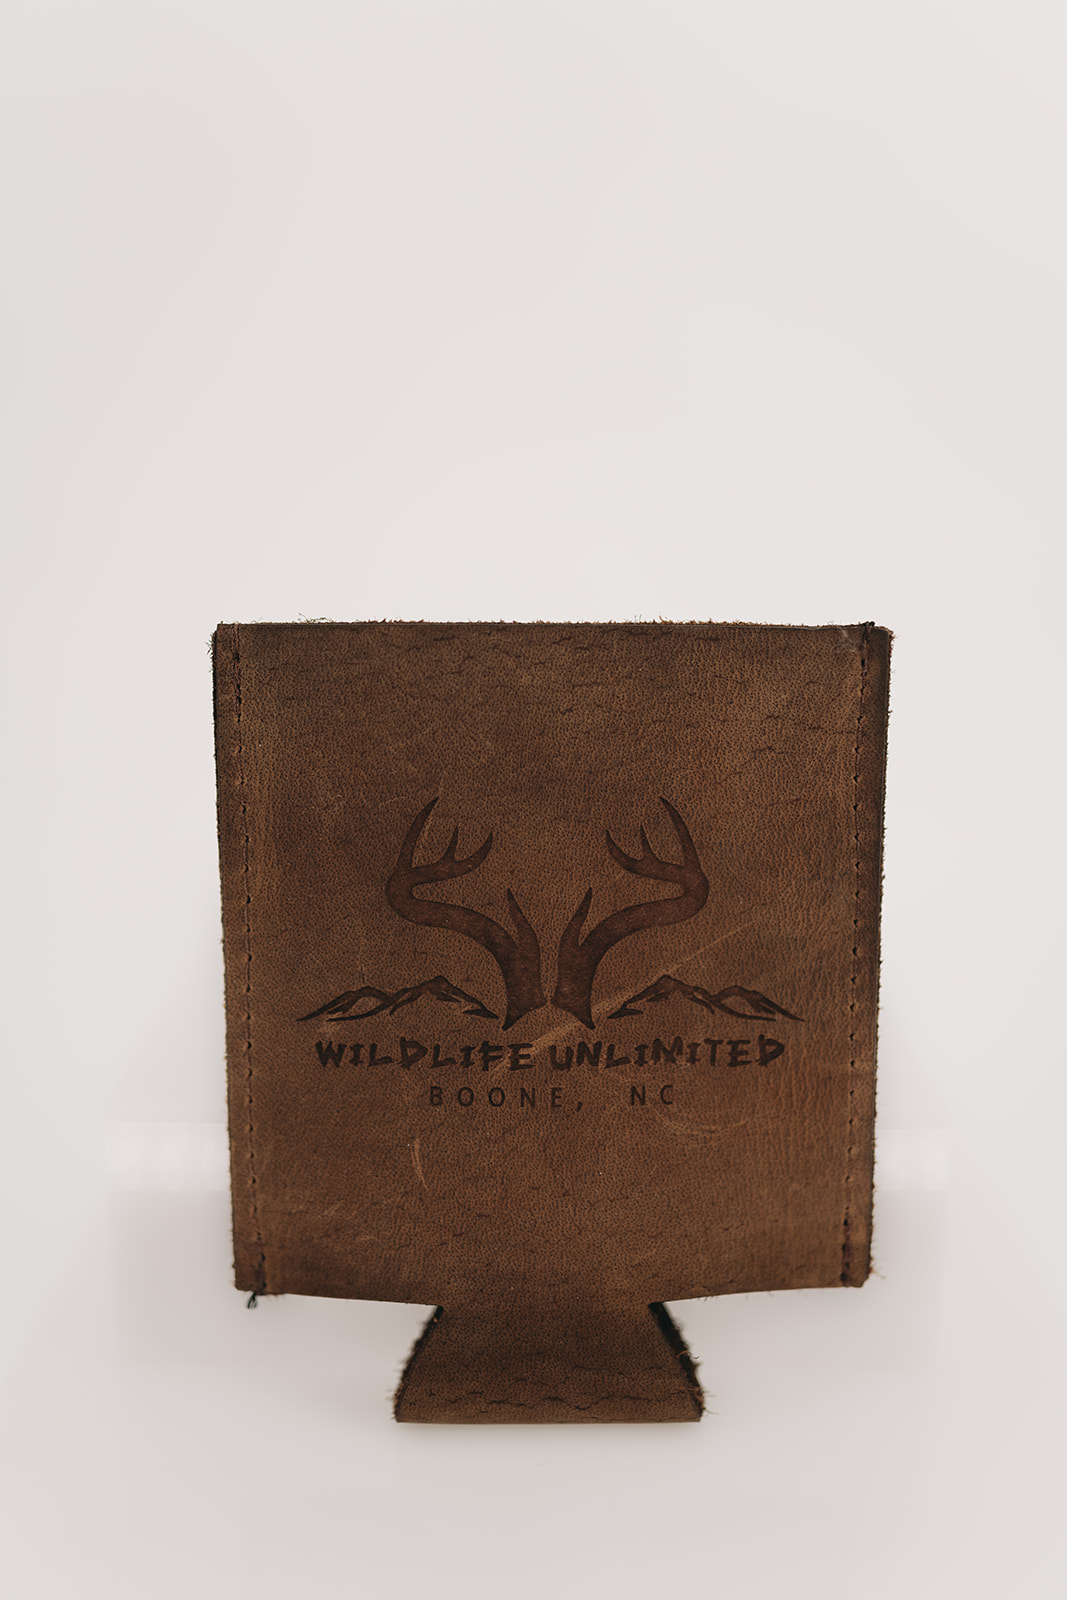 Wildlife Unlimited Leather Can Coozie